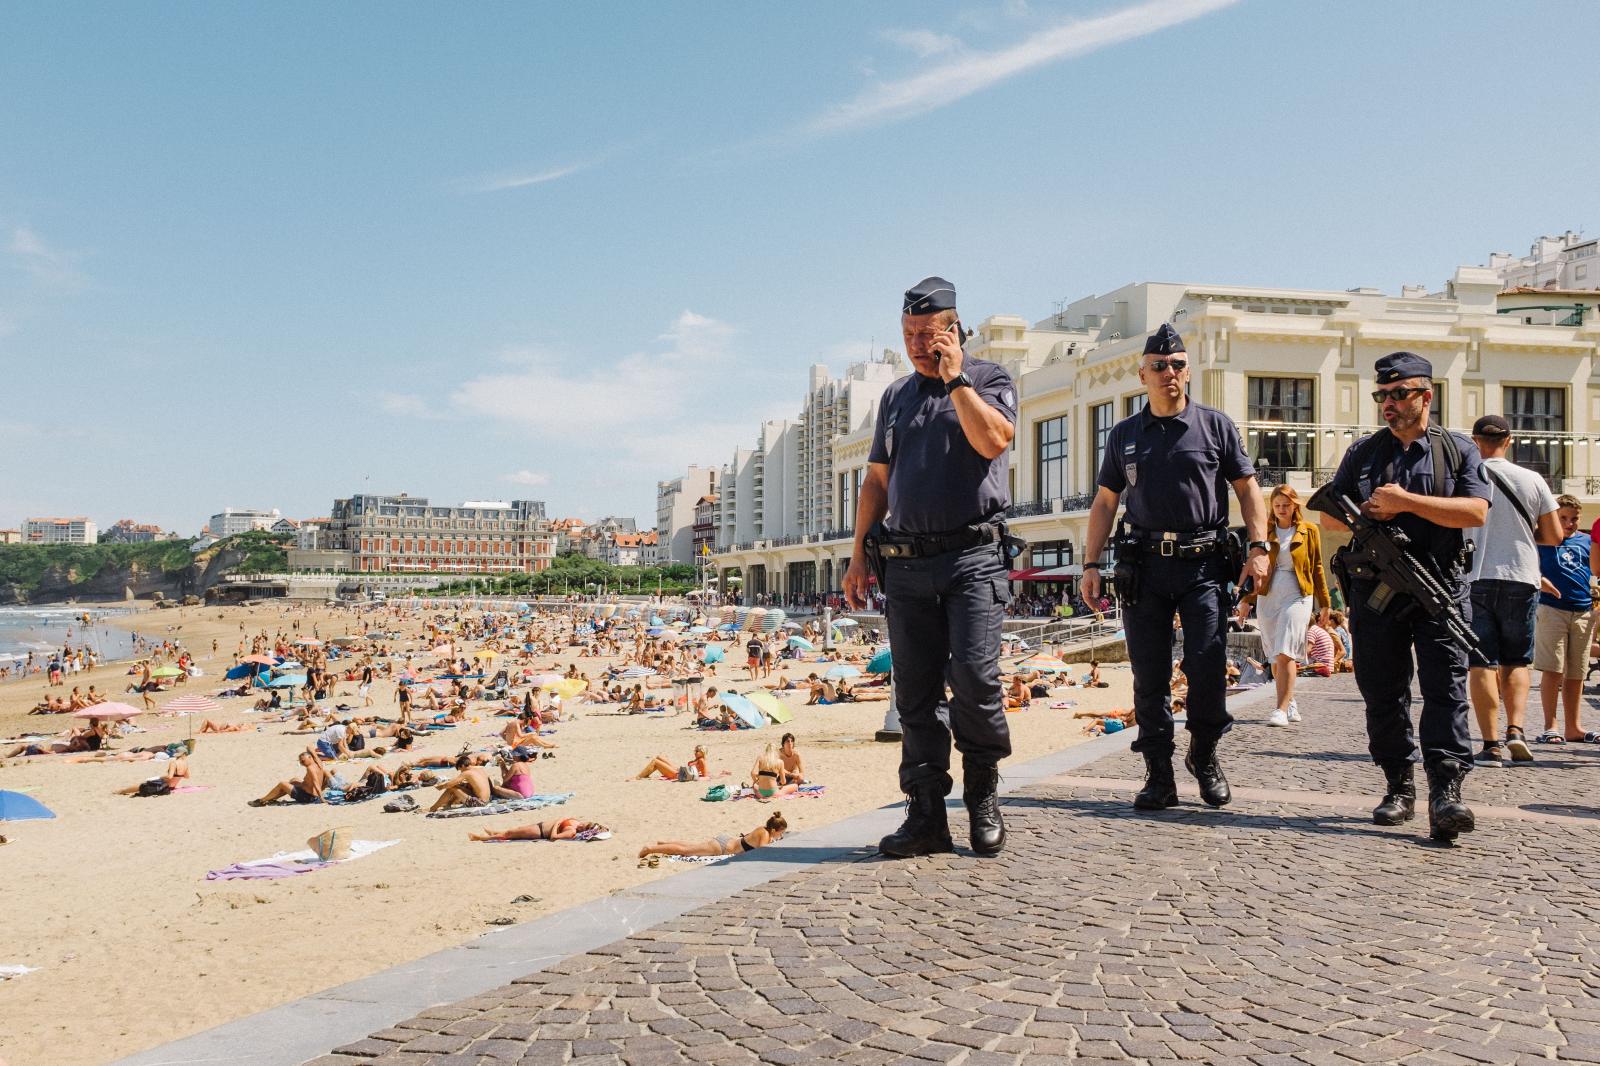 2019-08-21 - Armed police patro...ande Plage&#39; in Biarritz